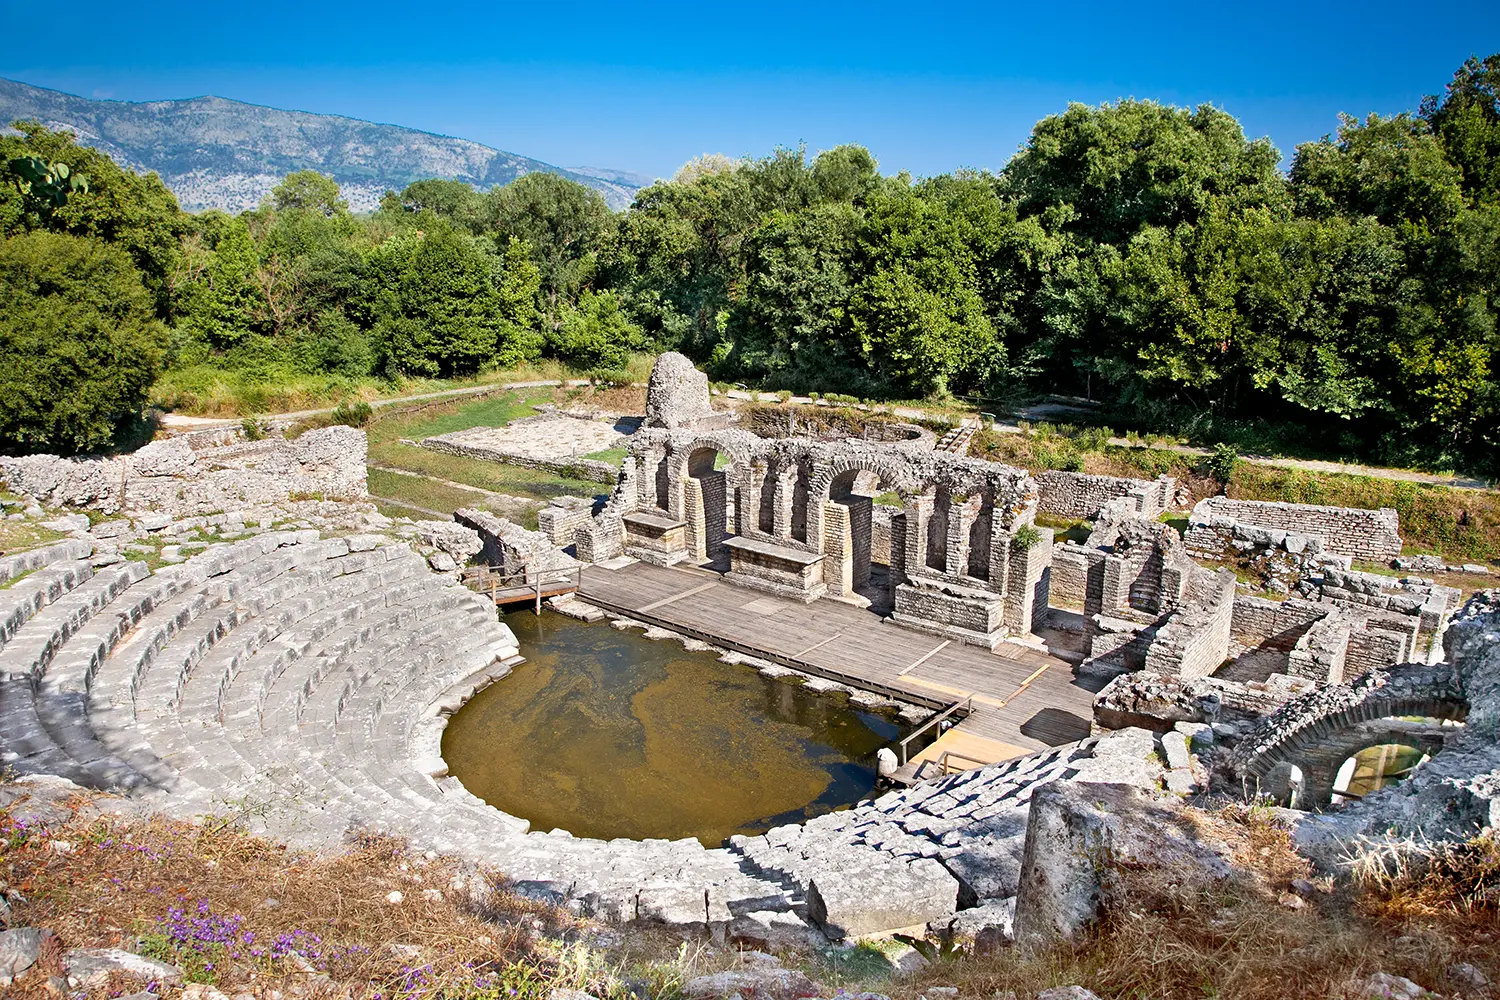 Amphitheater- Remains of the ancient Baptistery from the 6th century at Butrint, Albani